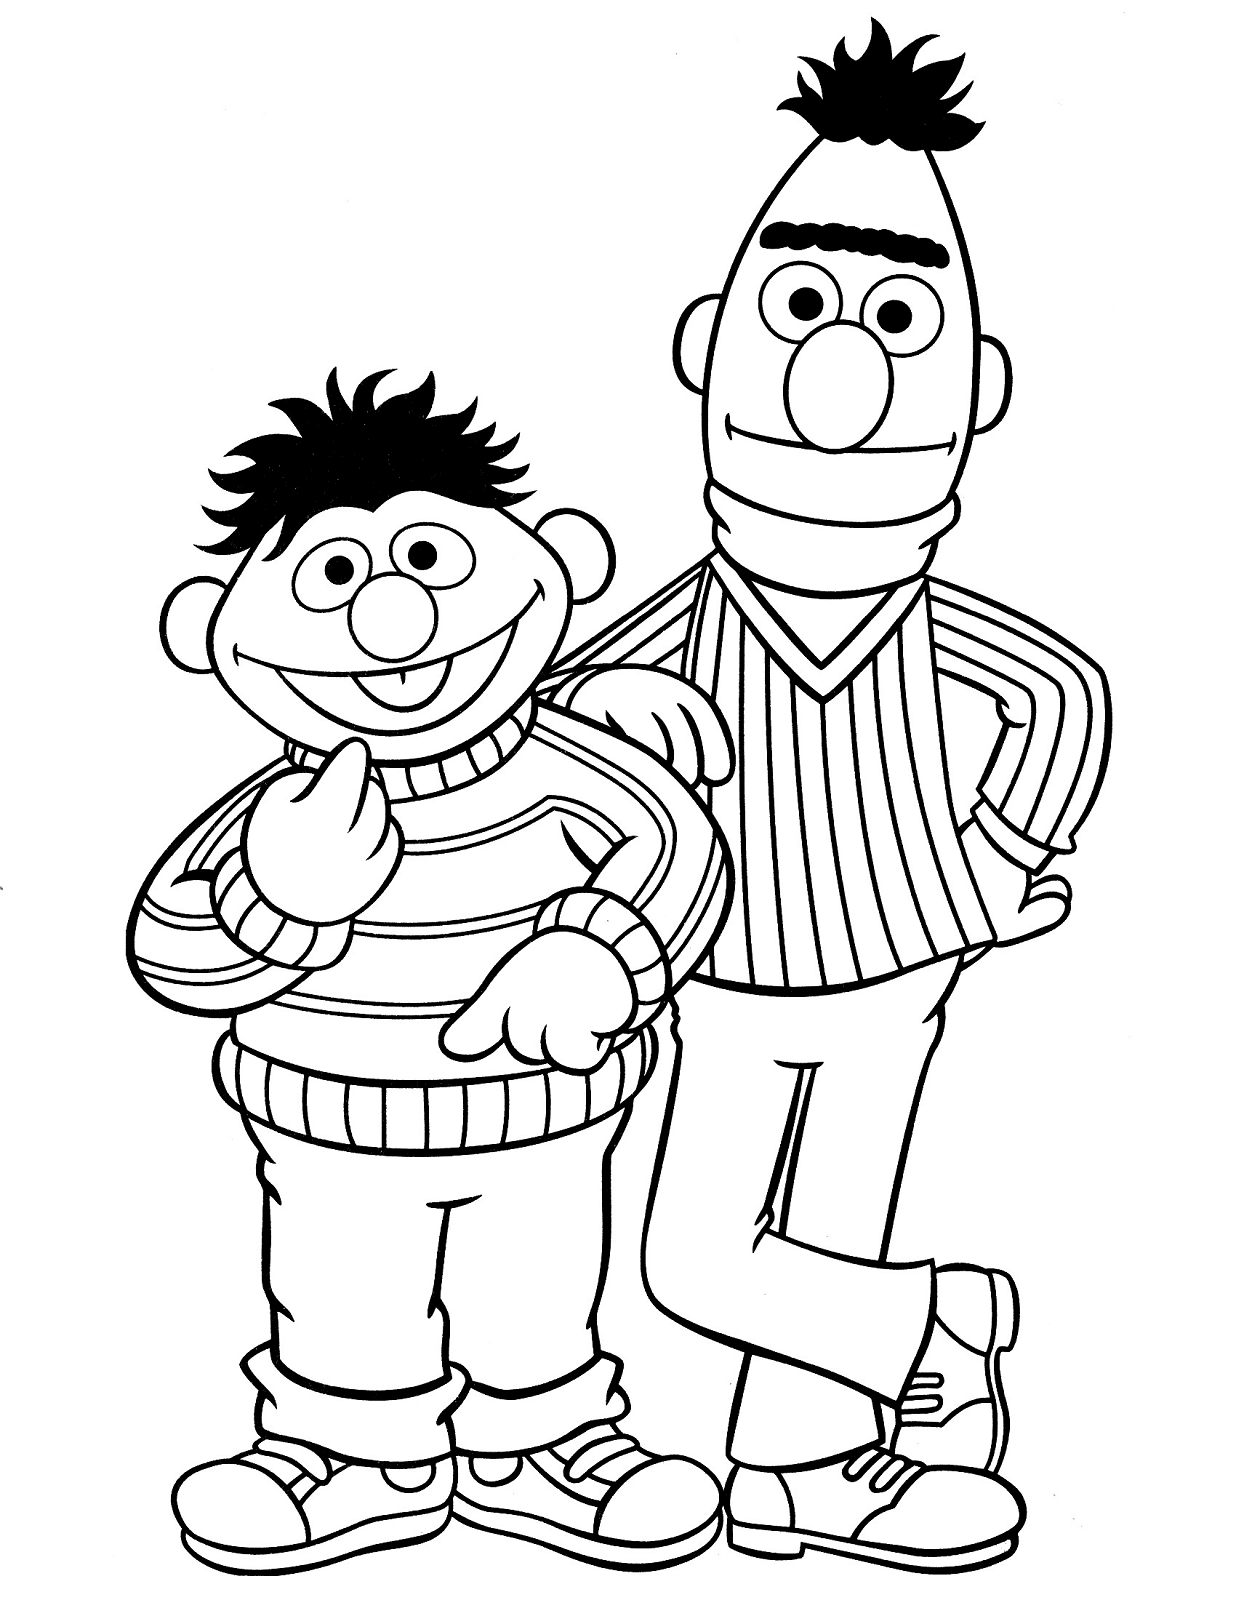 Sesame street coloring pages printable for free download